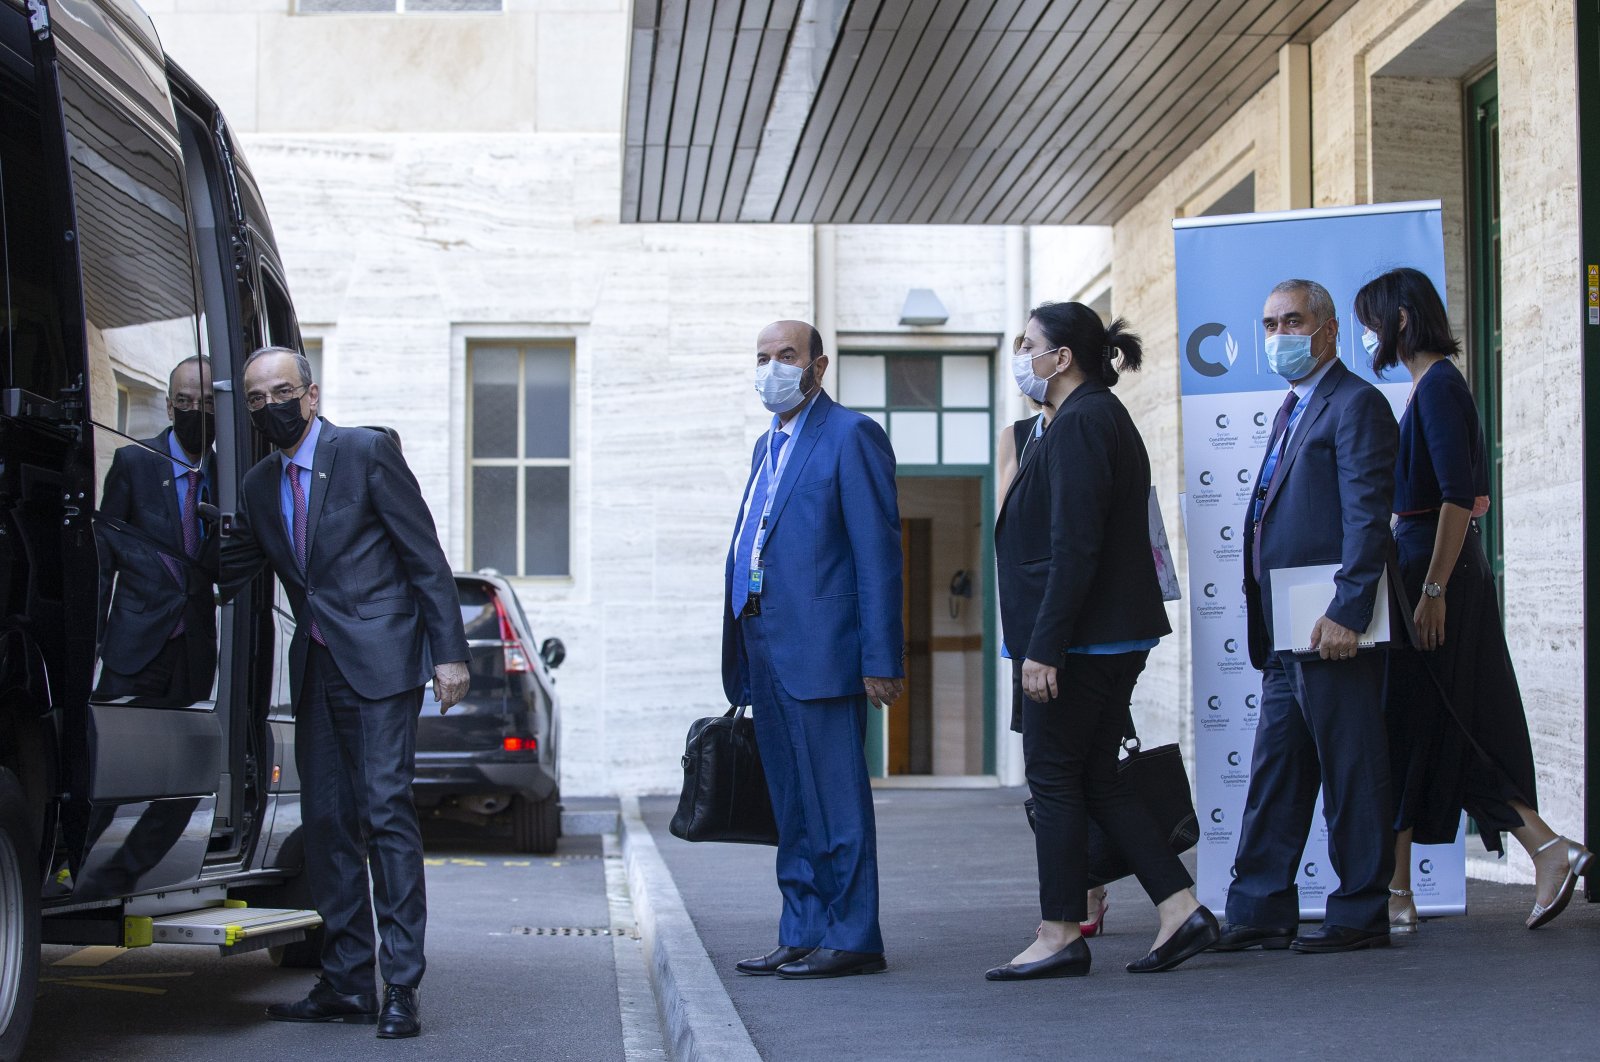 Syrian Constitutional Committee Co-Chair Hadi al-Bahra (L) leaves following the announcement of the suspension of the conference due to cases of COVID-19, at the European headquarters of the United Nations in Geneva, Switzerland, Aug. 24, 2020. (AP Photo)